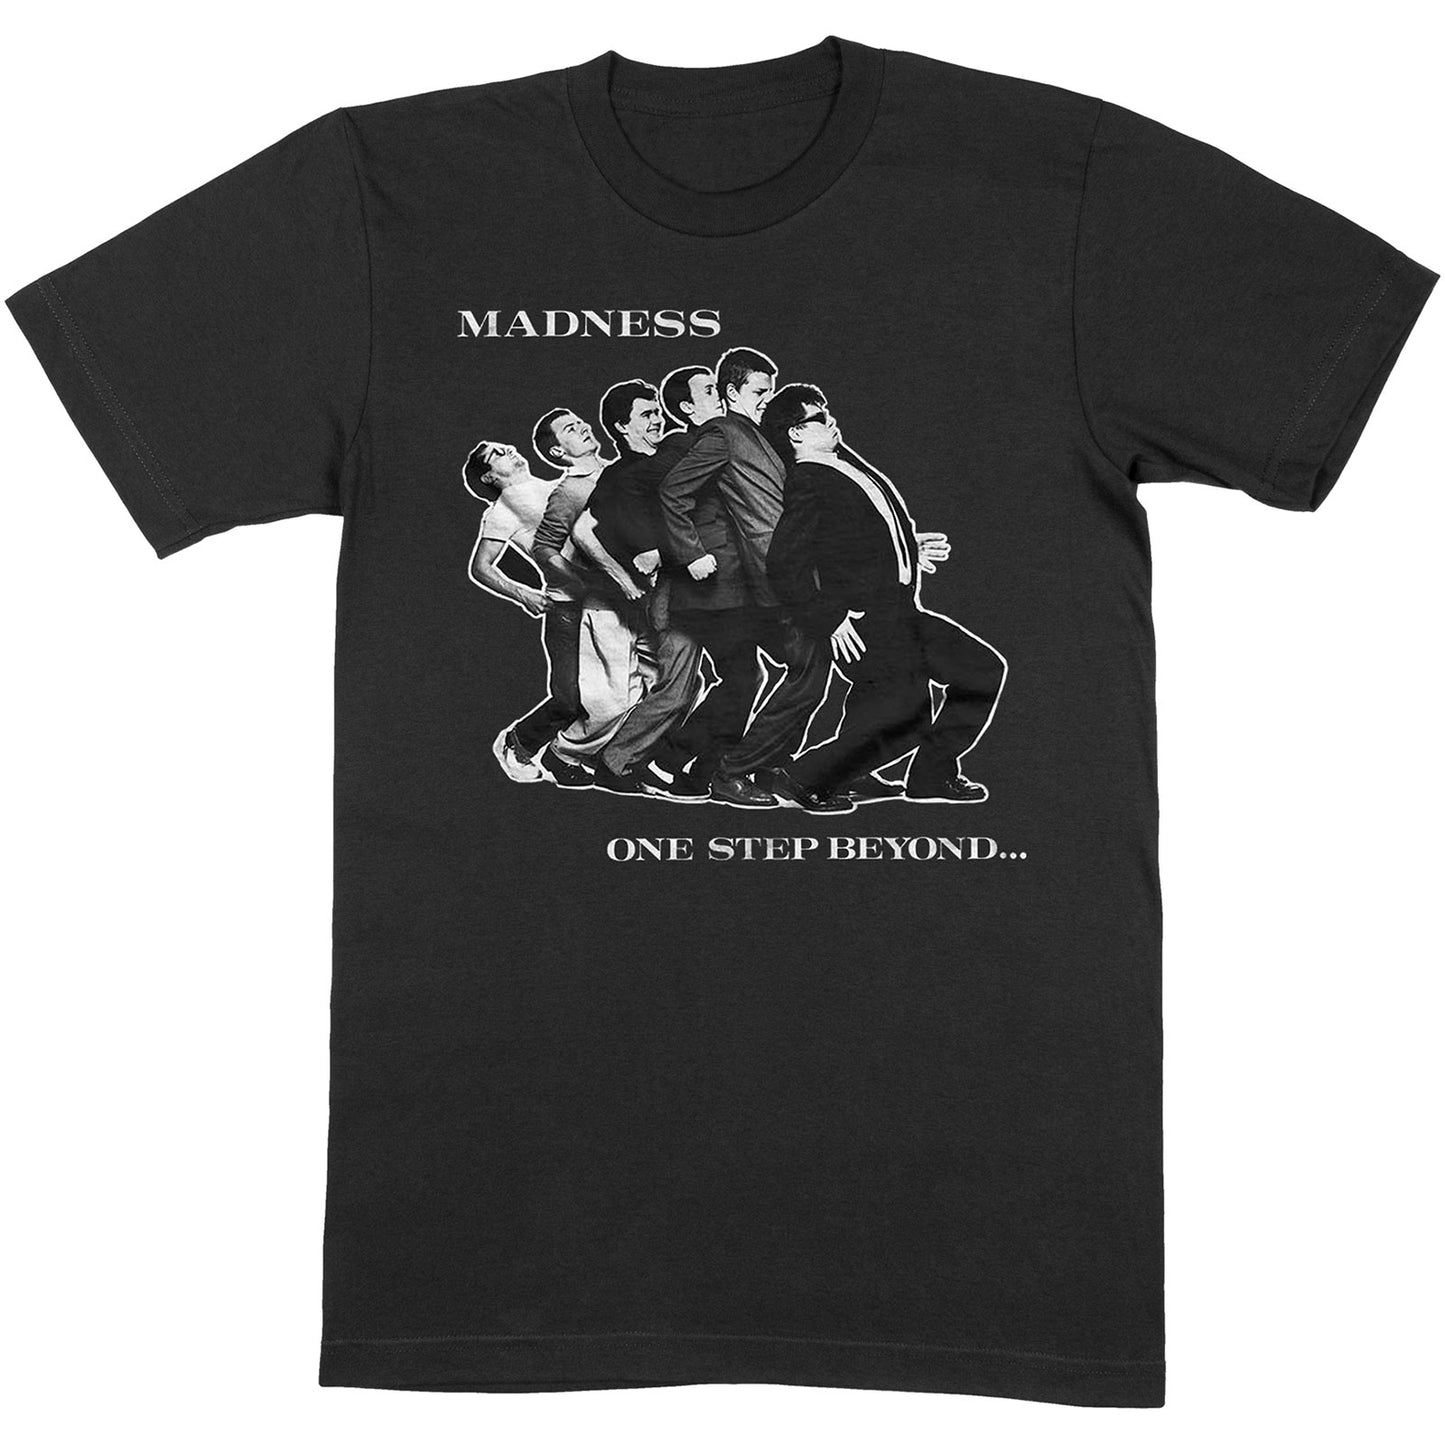 Madness T-Shirt: One Step Beyond